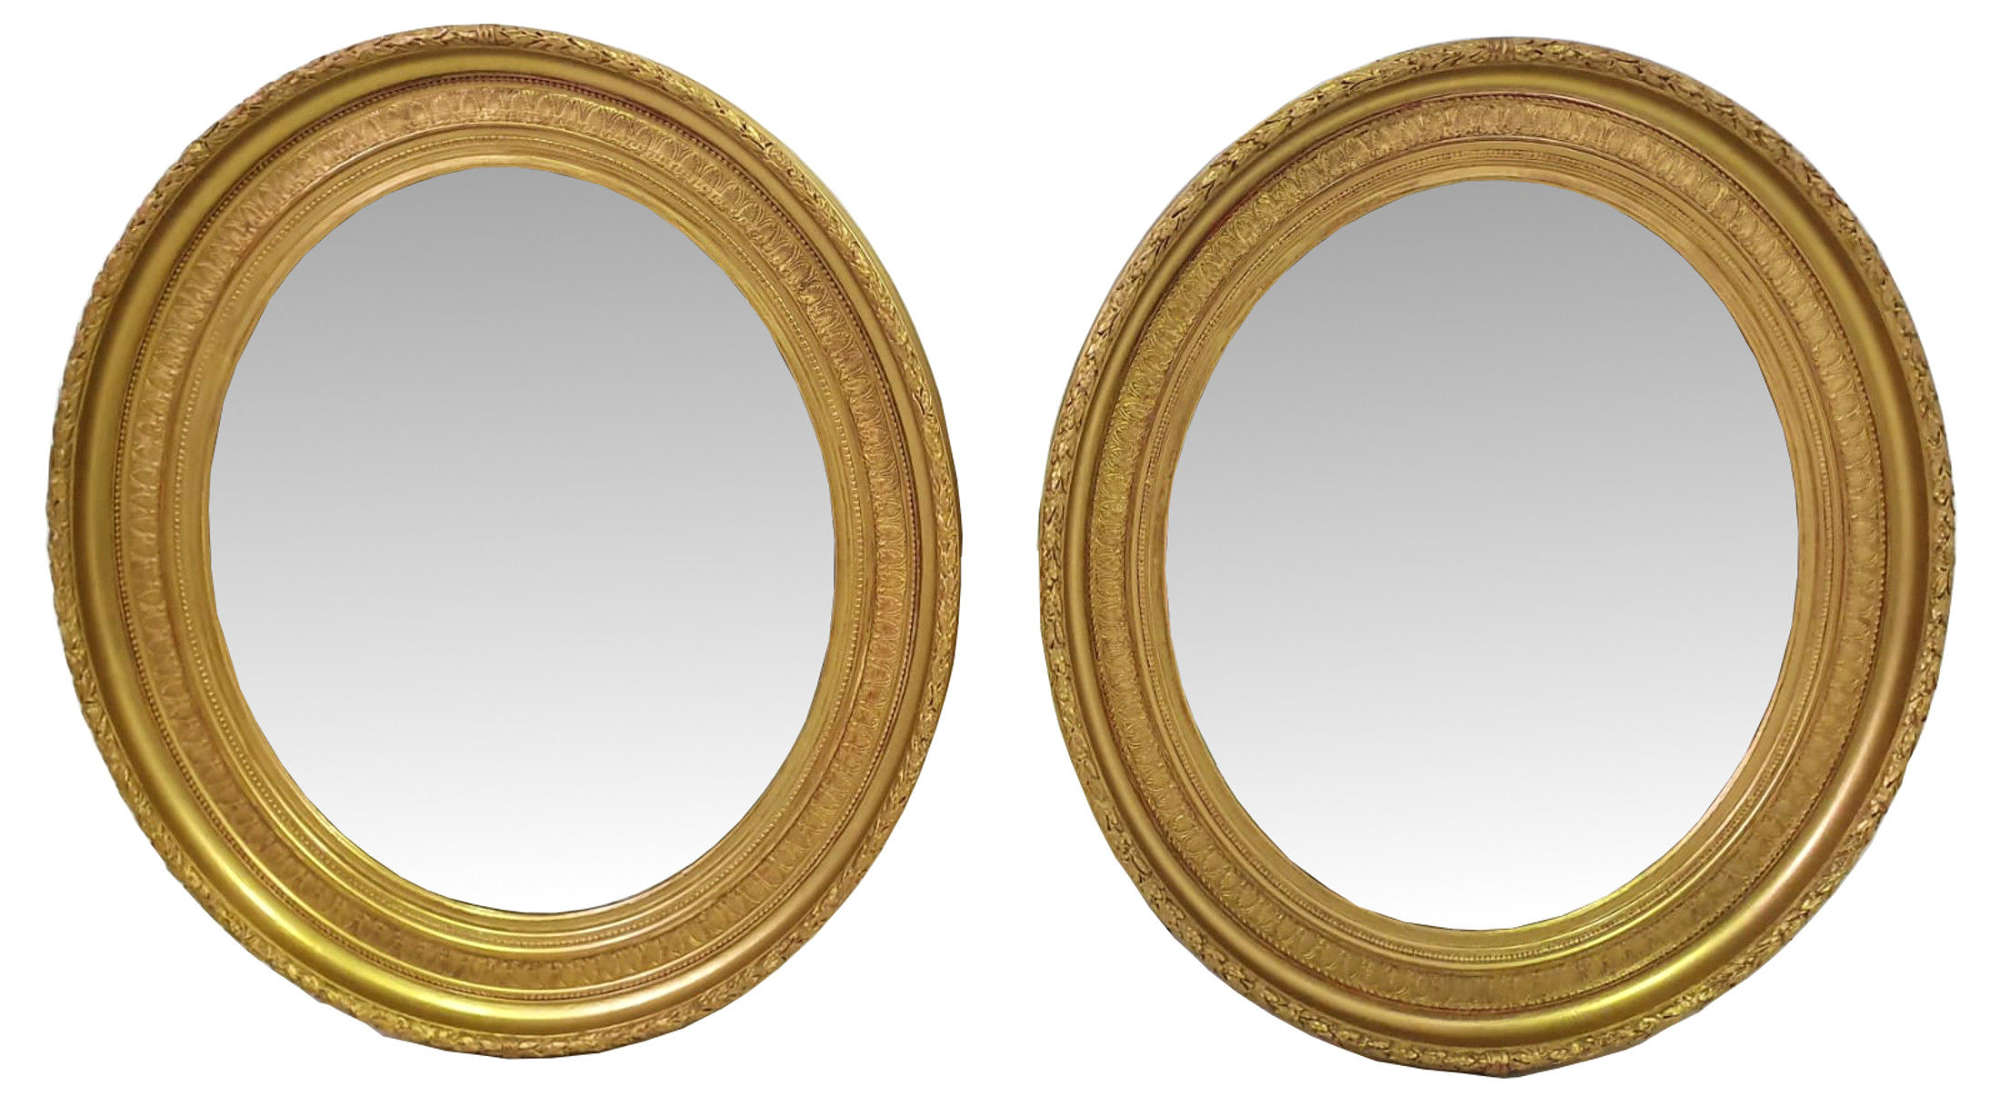 Pair Of 19th Century Gilt Oval Antique Mirrors